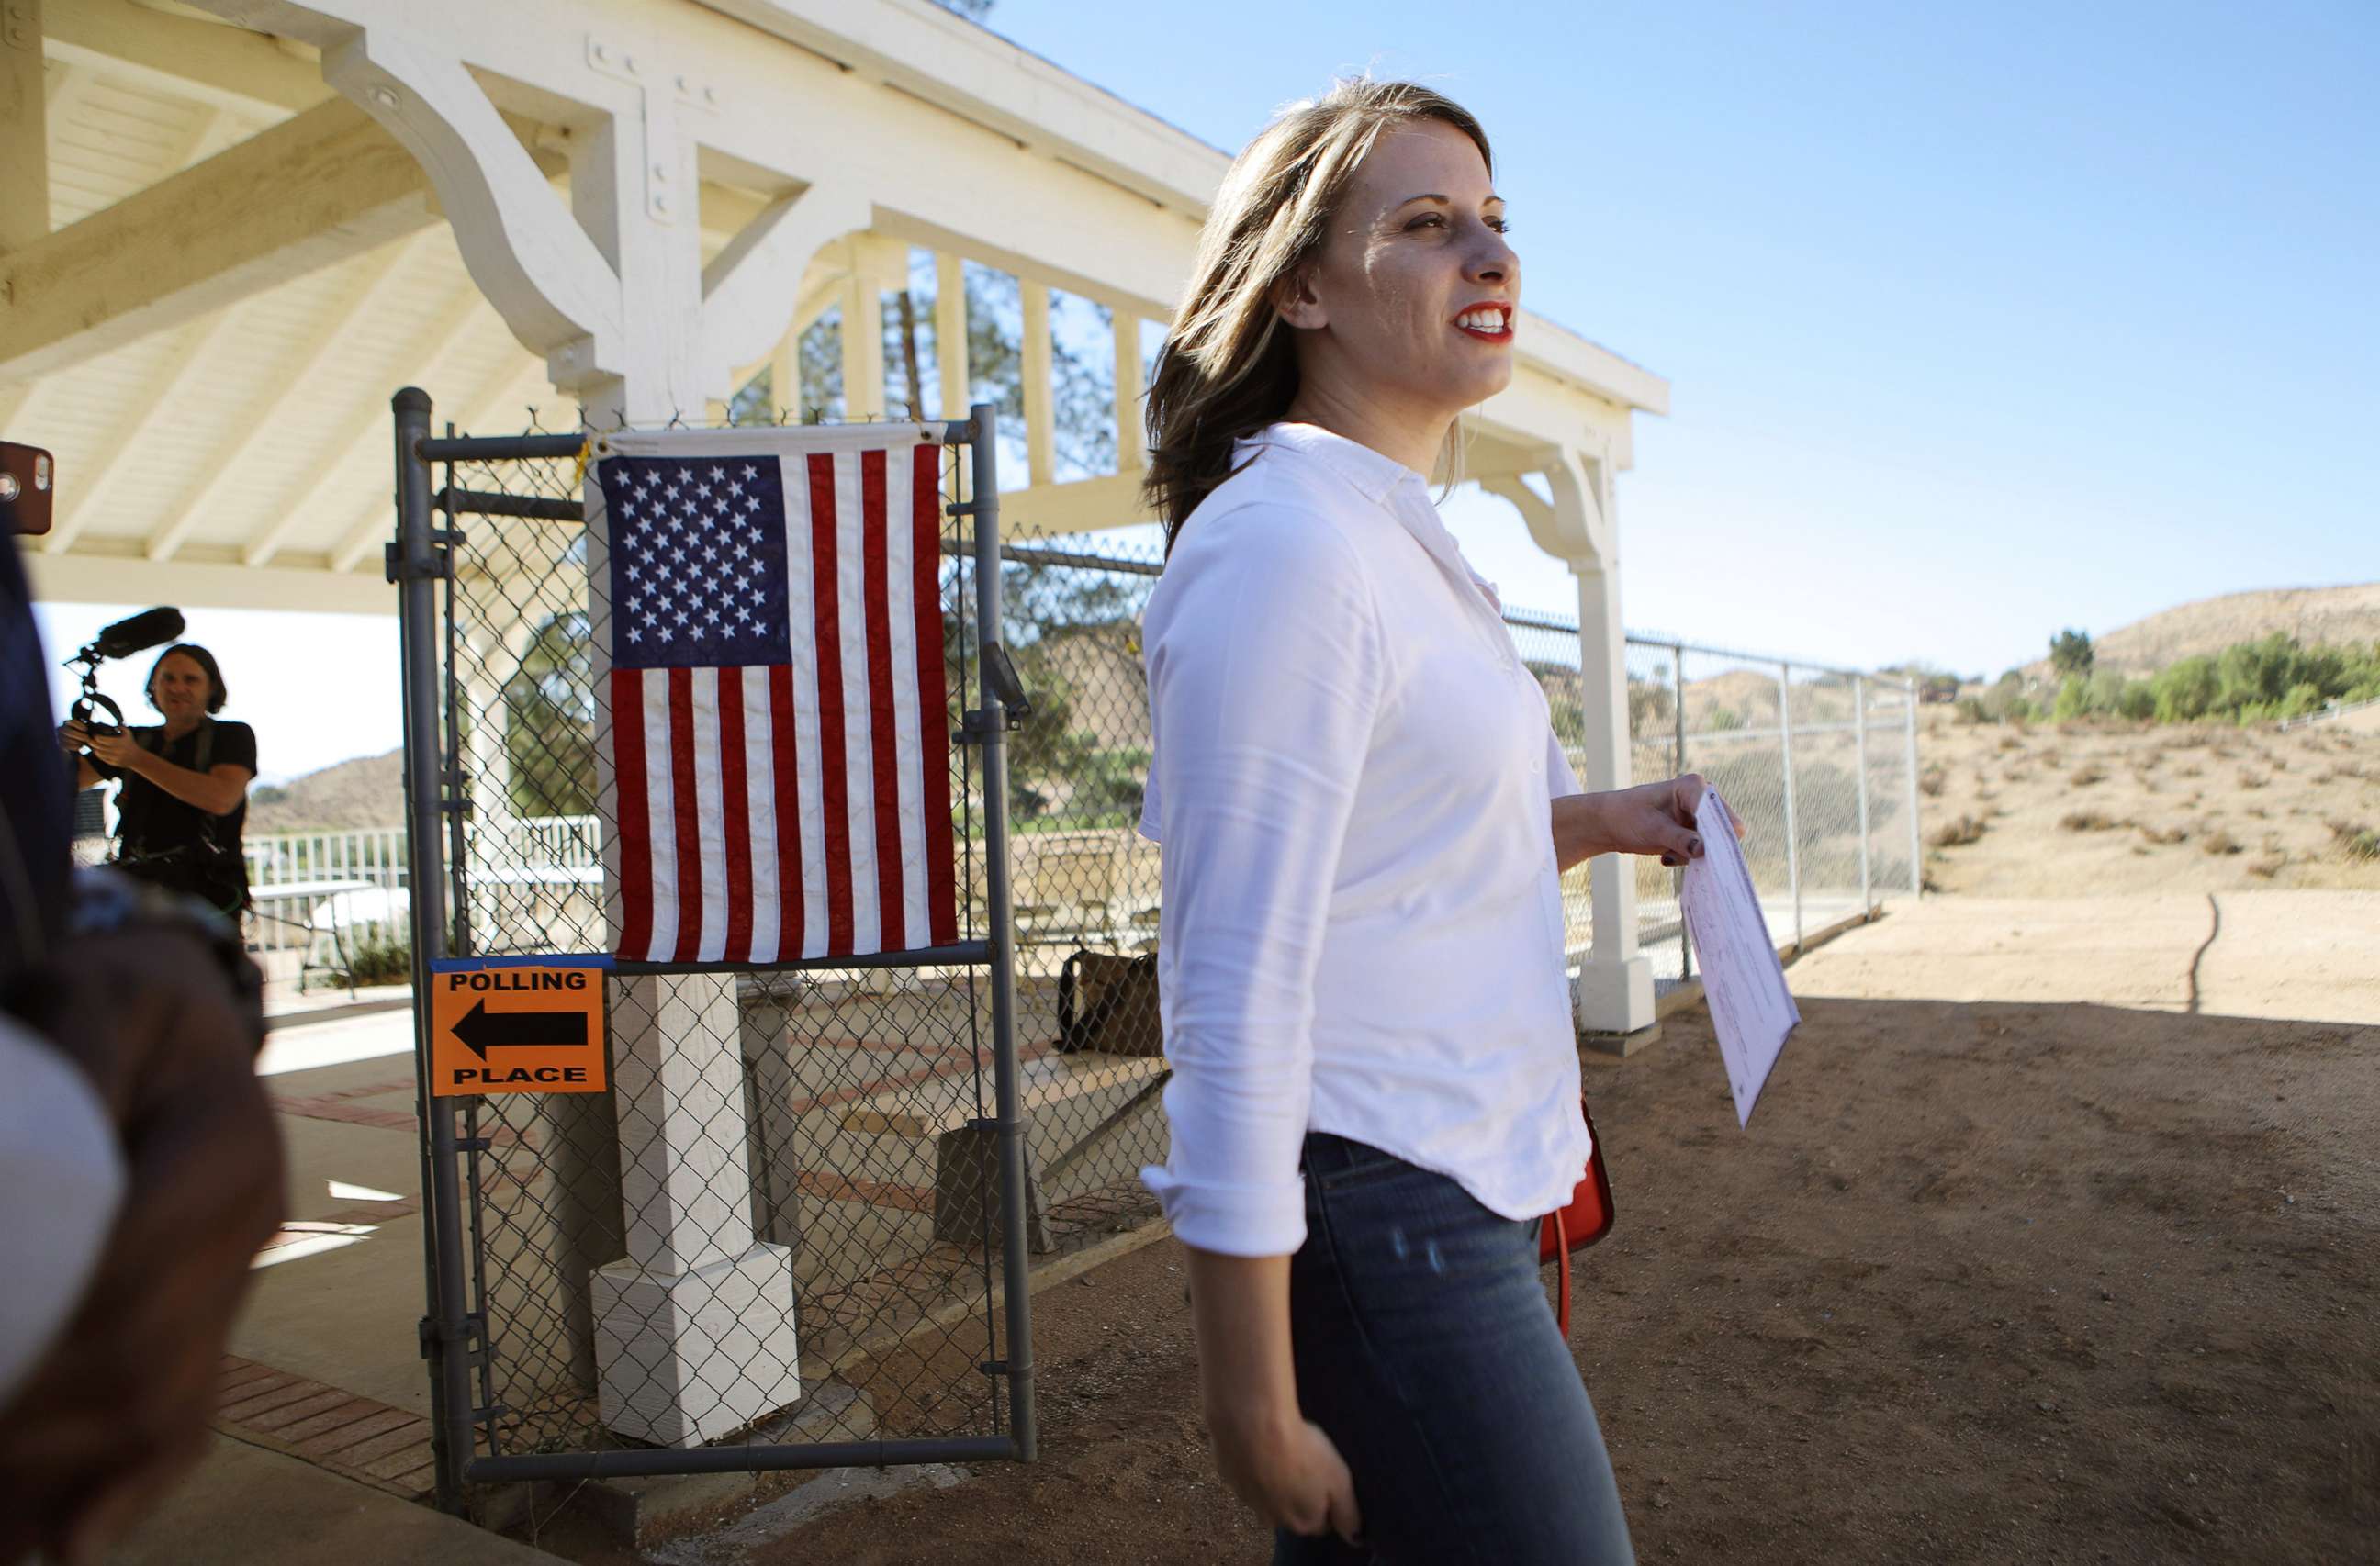 PHOTO: Democratic Congressional candidate Katie Hill prepares to enter a polling place to vote in California's 25th Congressional district on Nov. 6, 2018 in Agua Dulce, Calif.